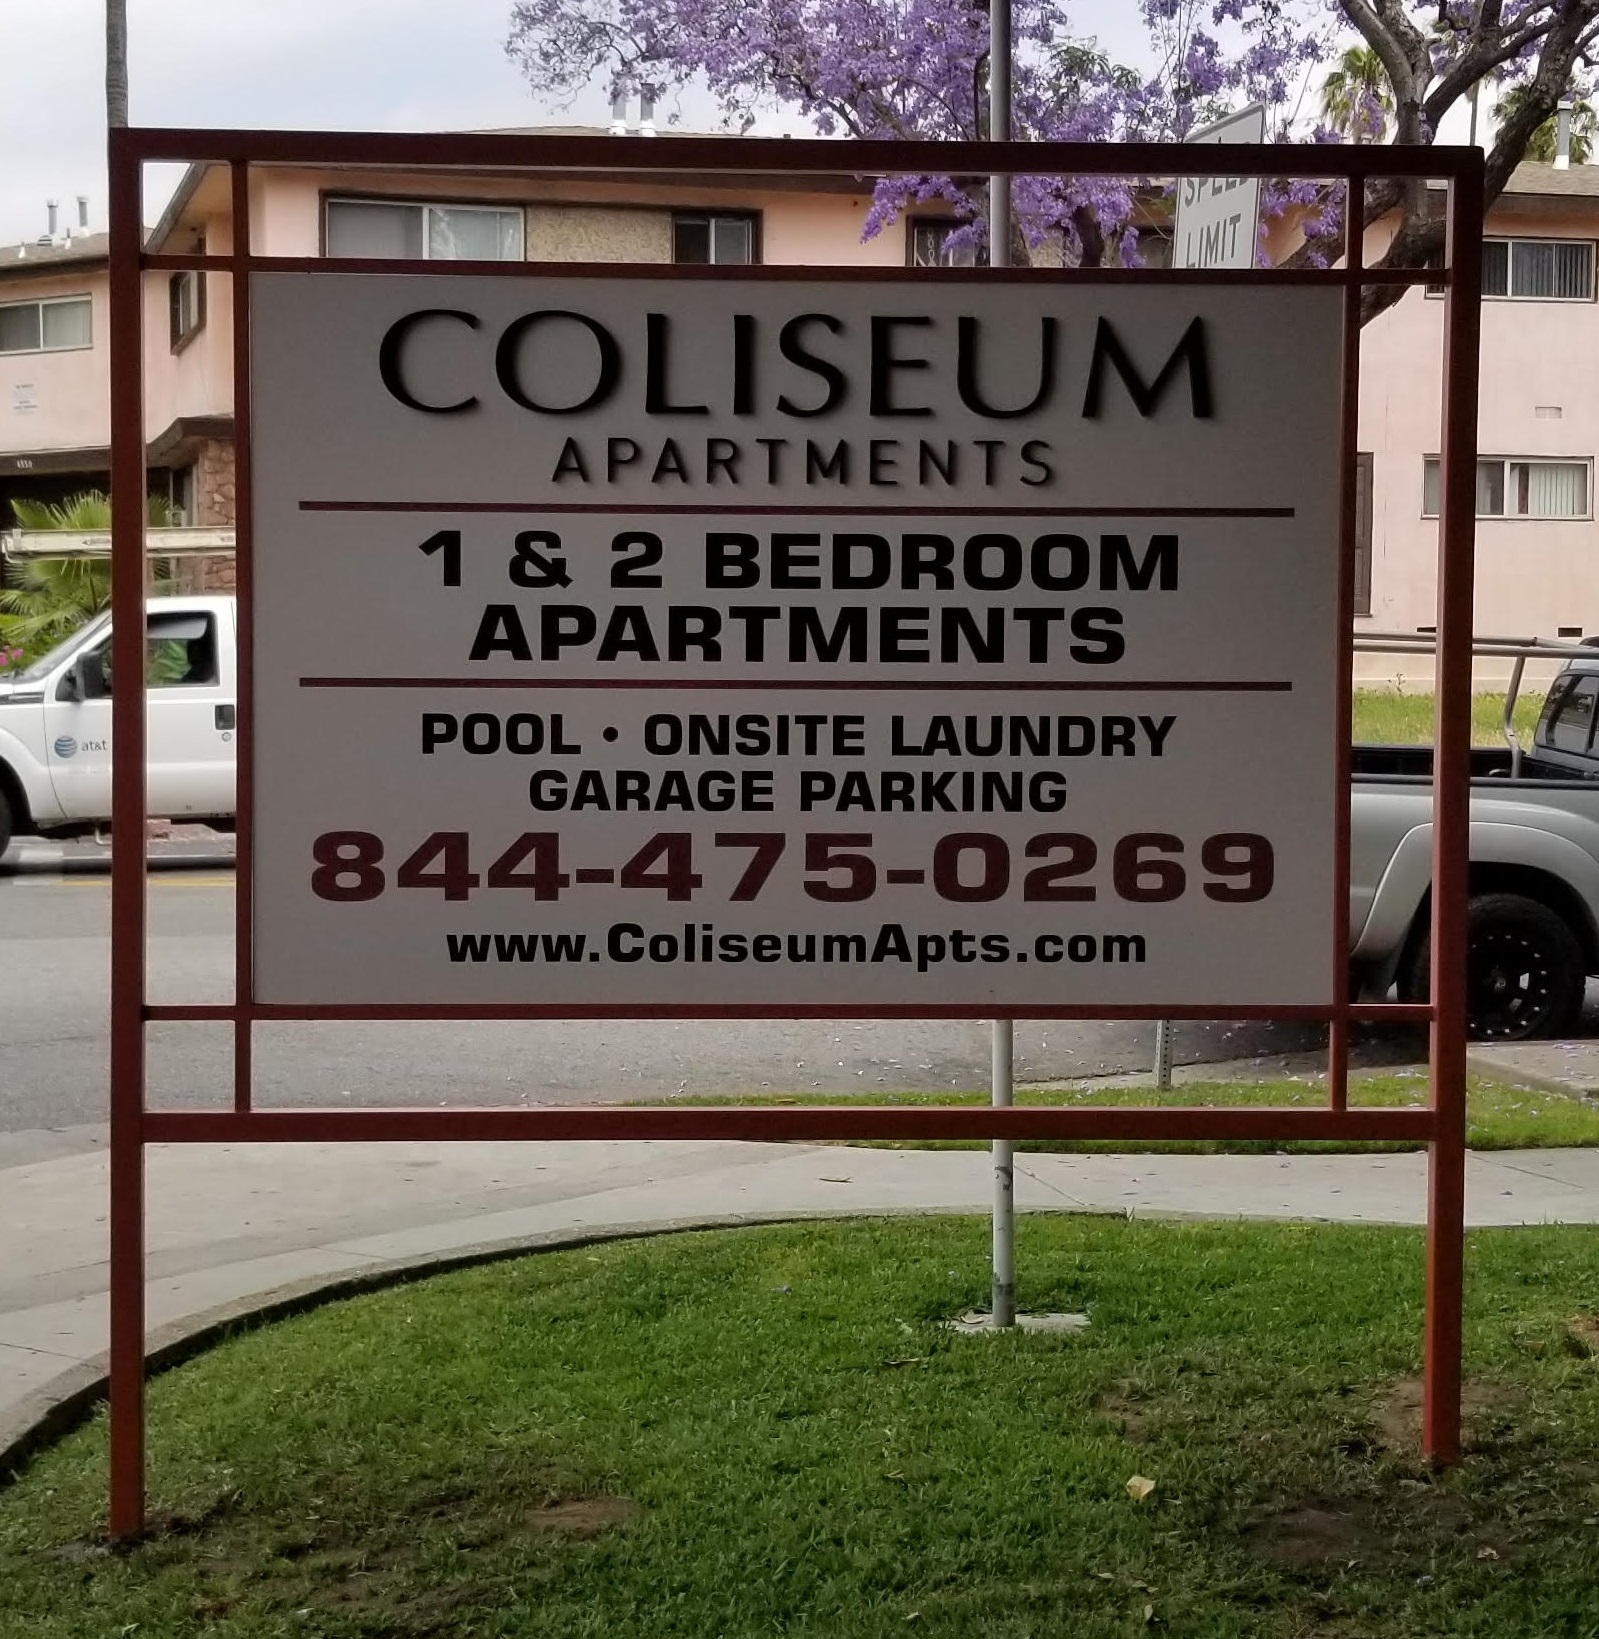 You are currently viewing Monument Post and Panel Sign for Coliseum Apartments in Los Angeles